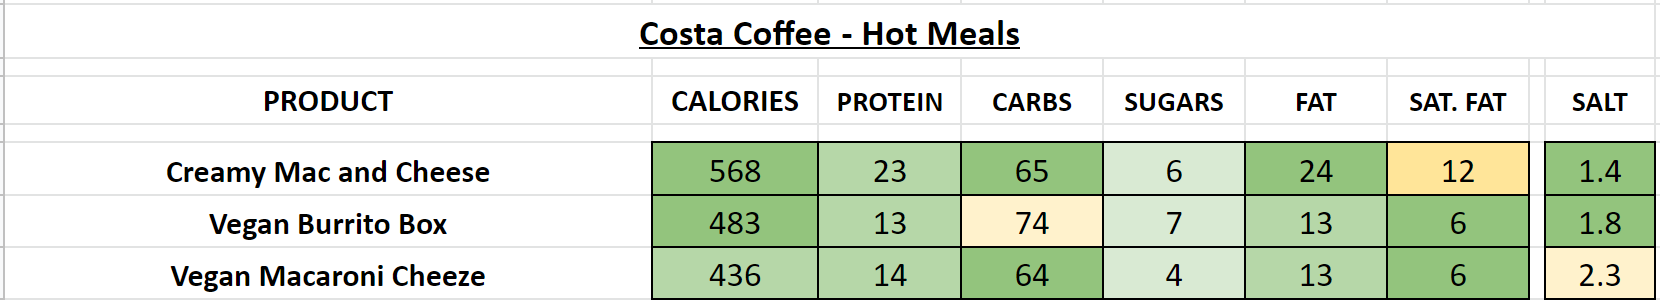 costa coffee hot meals nutritional information calories